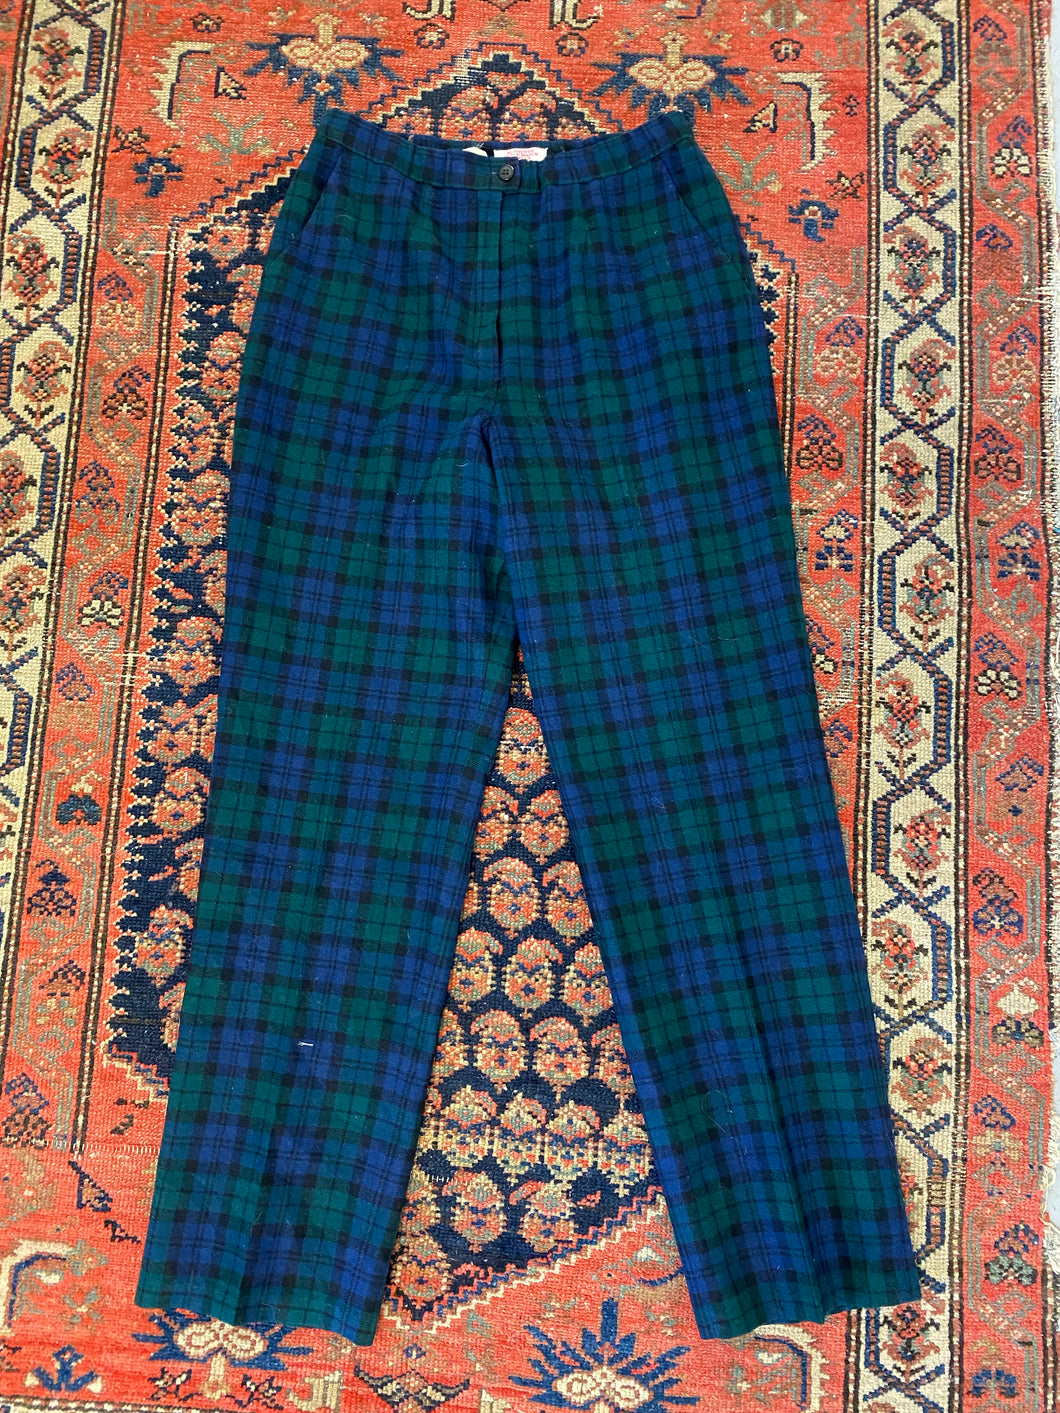 90s Plaid High Waisted Wool Trousers - 27inches